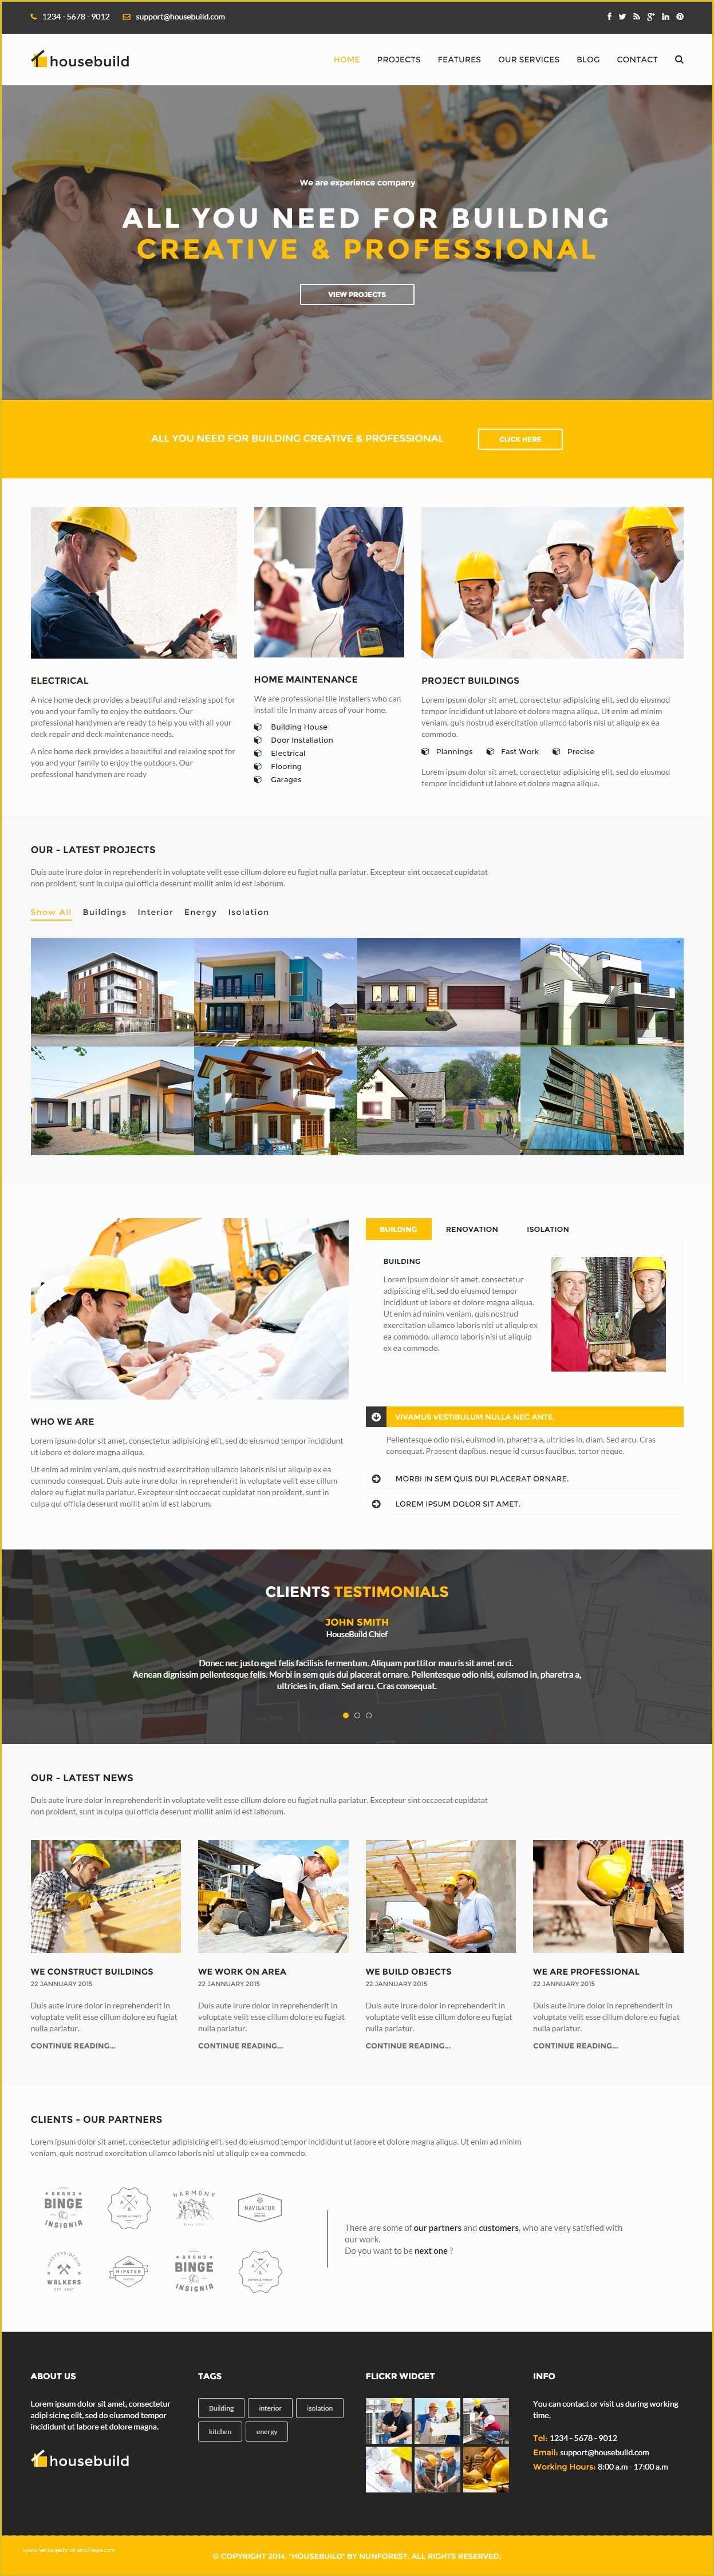 Html5 Business Website Templates Free Download Of 20 Professional Business Website Templates Free Download